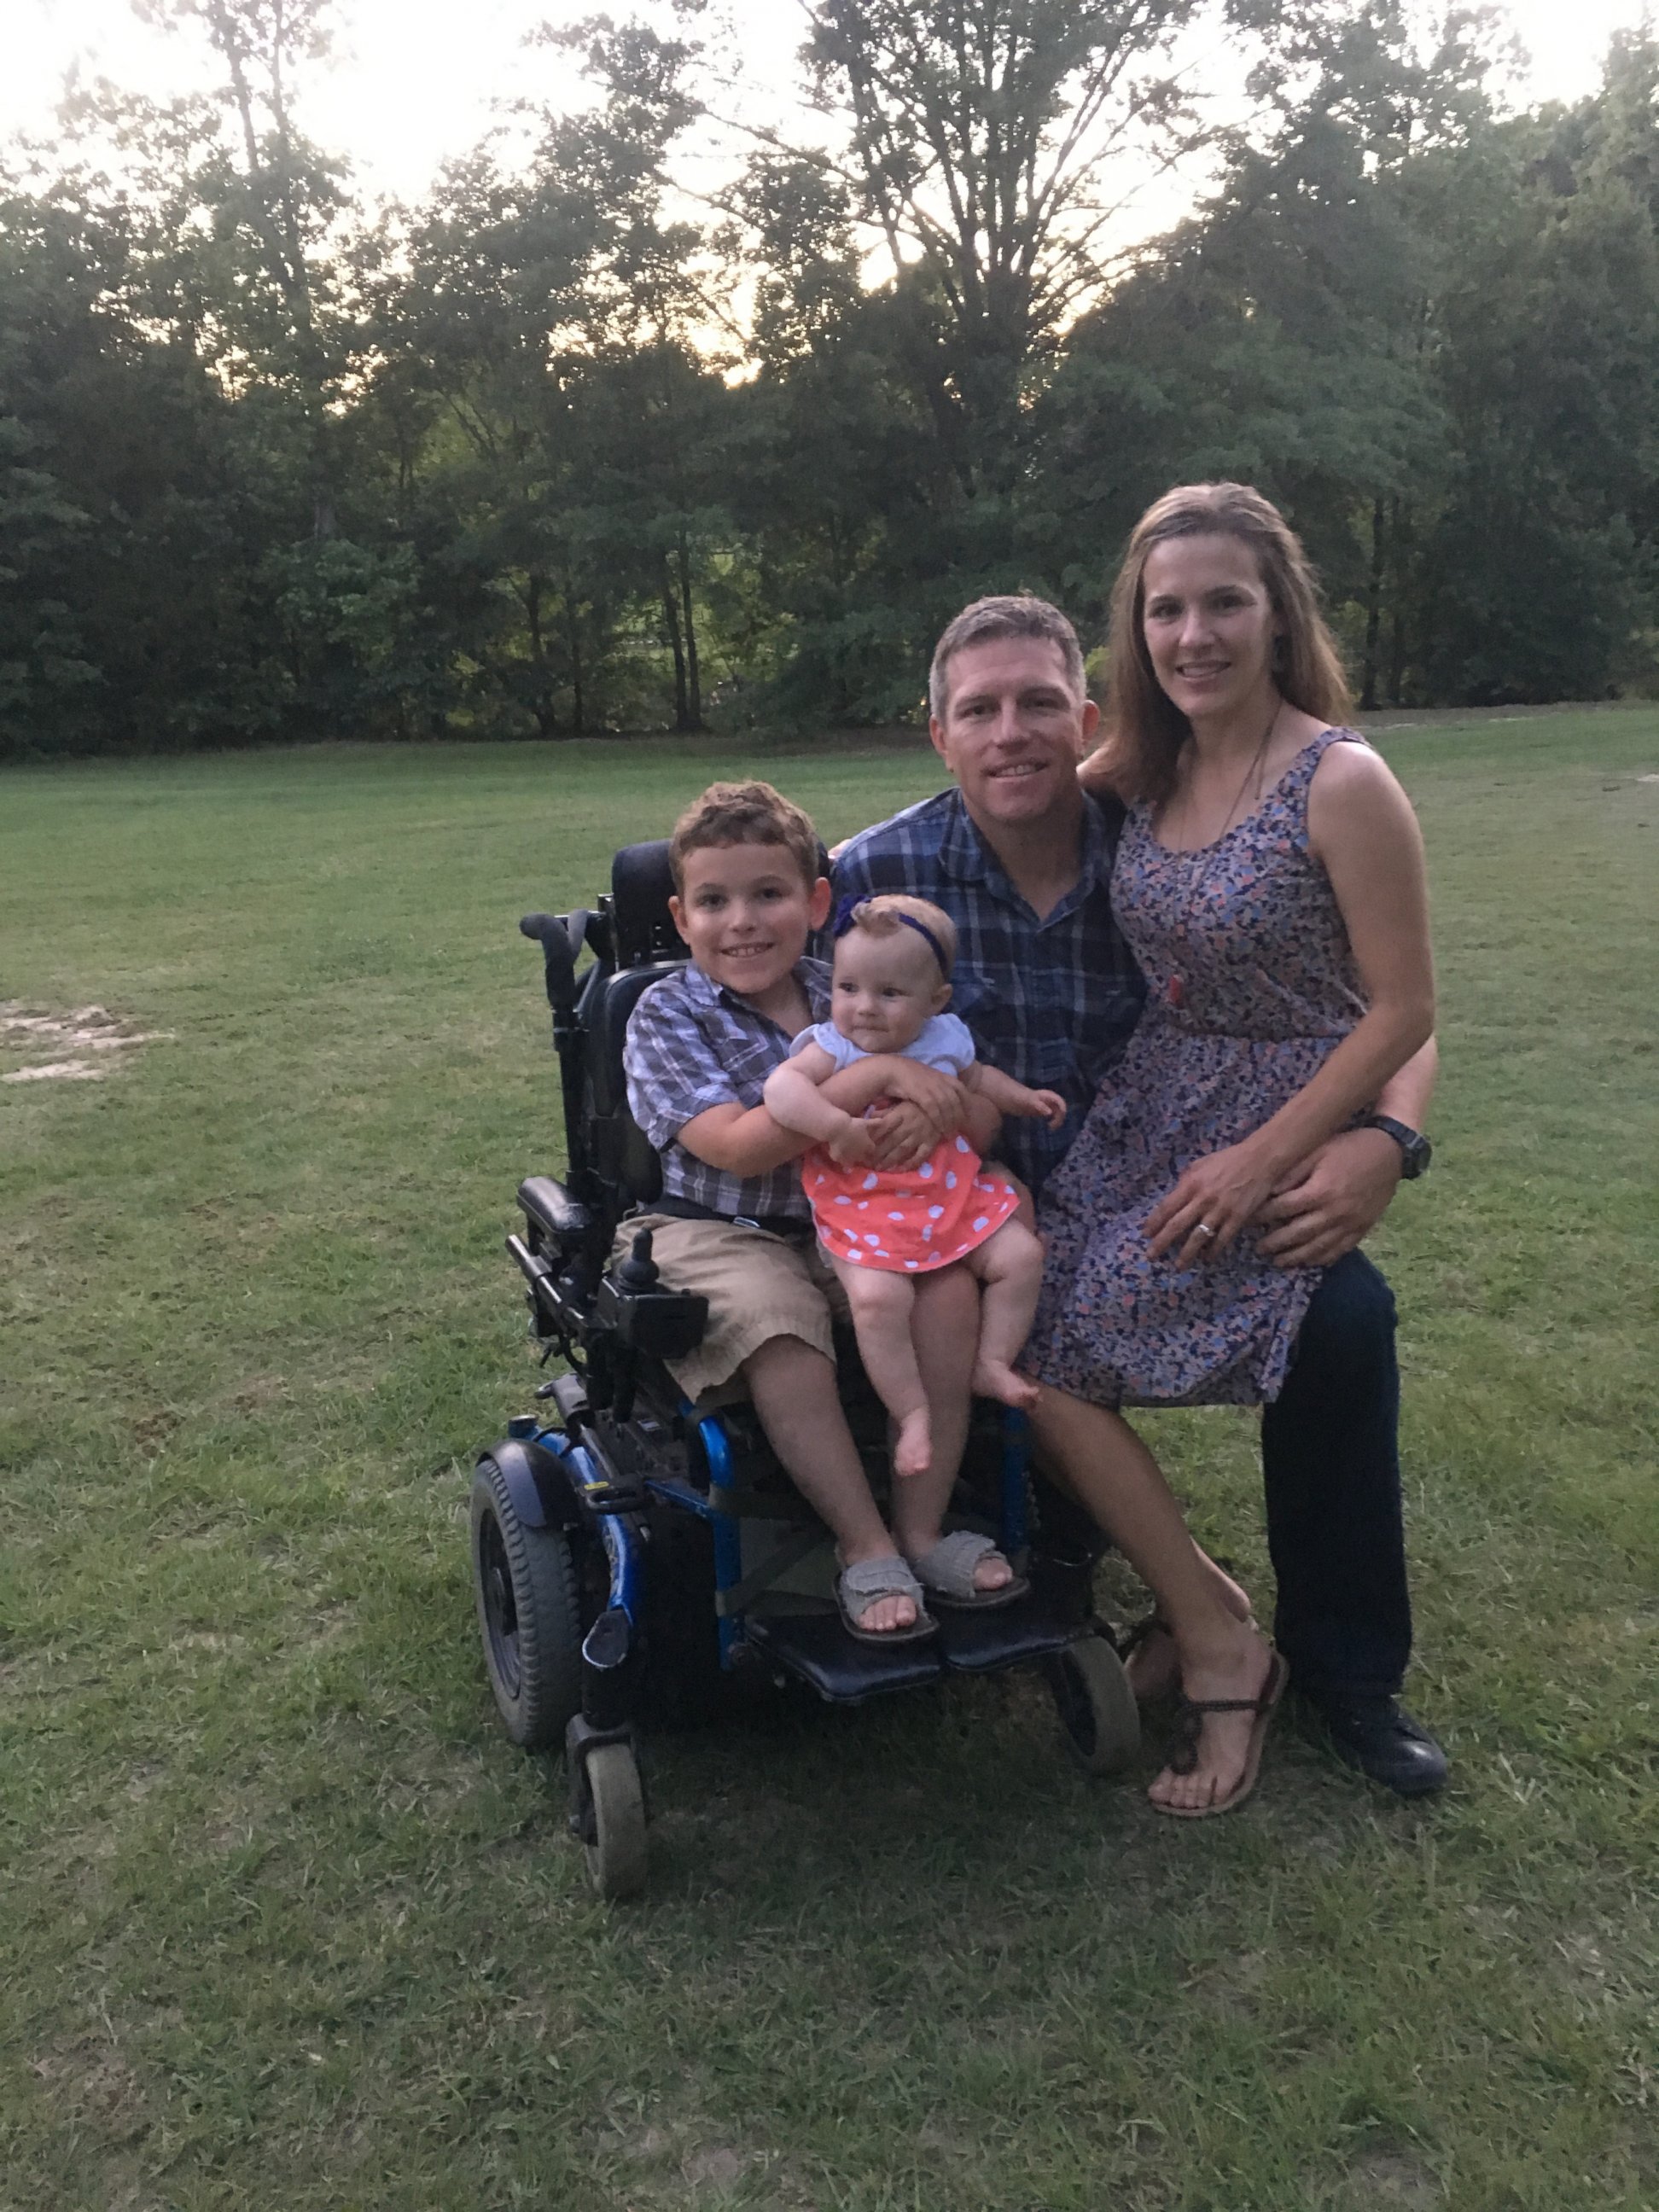 PHOTO: Kari Merriken took to Facebook on July 22 to thank the employees of Chick-fil-A in Columbus, Georgia for playing with her son Caleb, who has spinal muscular atrophy, after he was left out of a group of children playing nearby. 